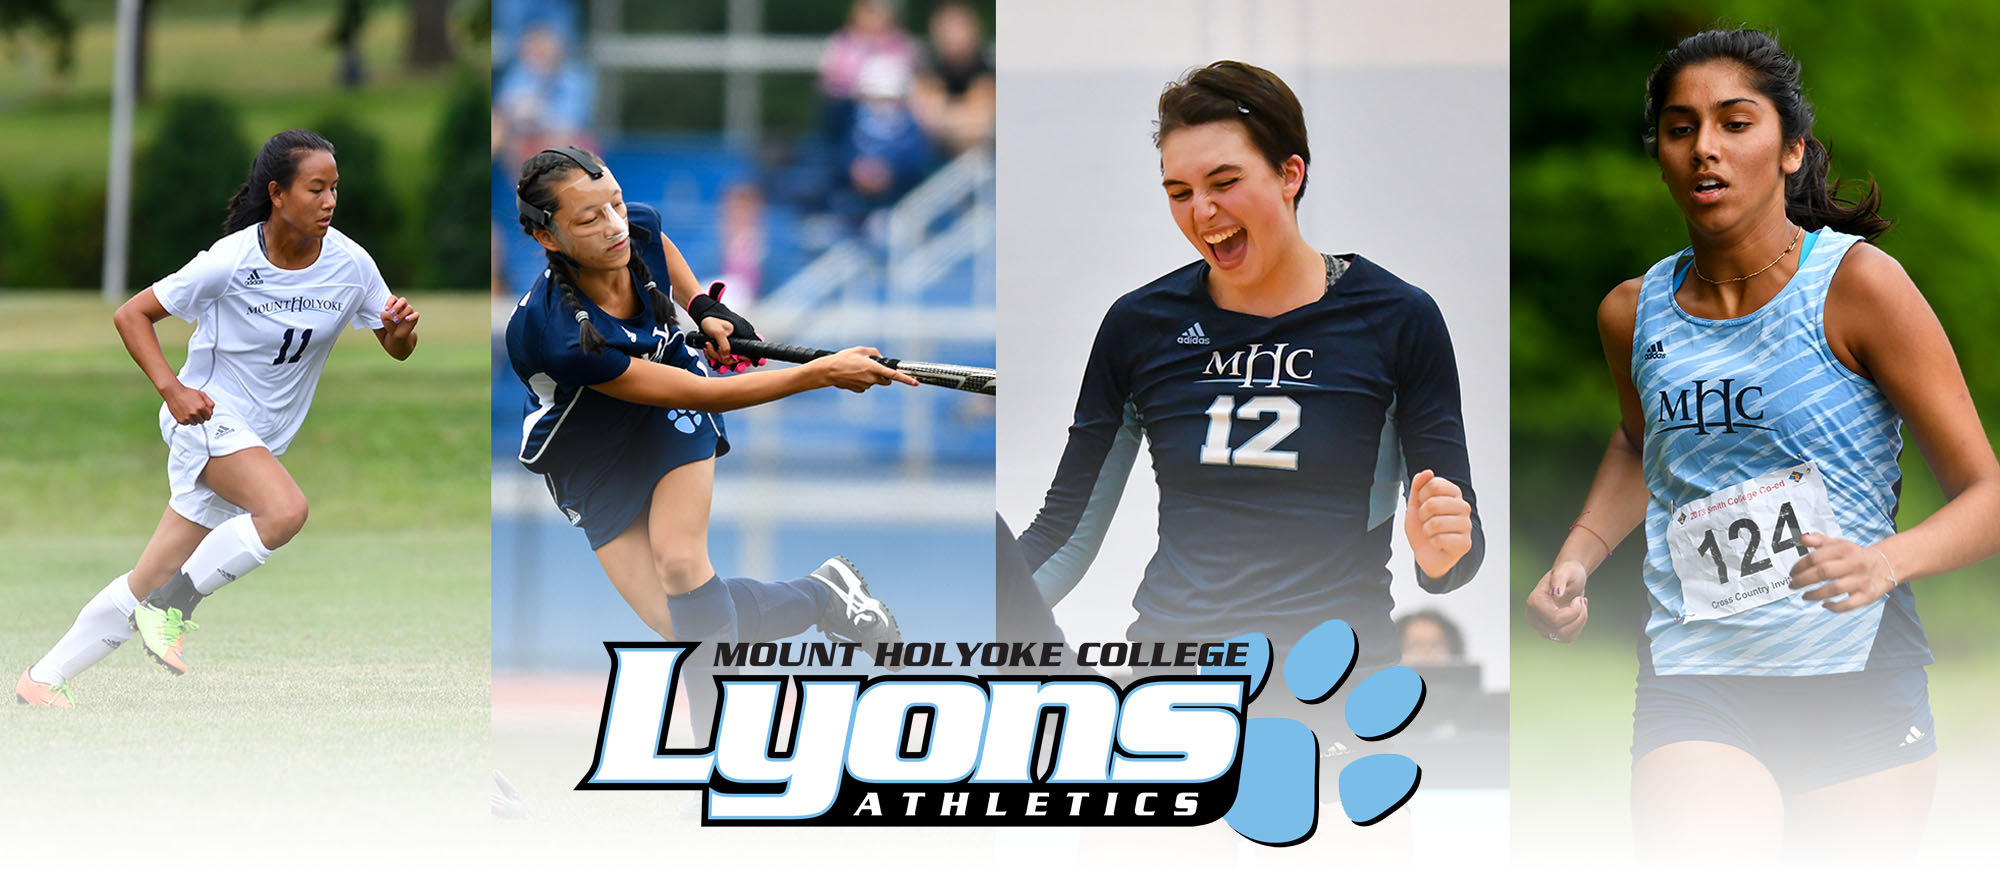 Mount Holyoke College Opens 2019-20 Athletic Season This Weekend